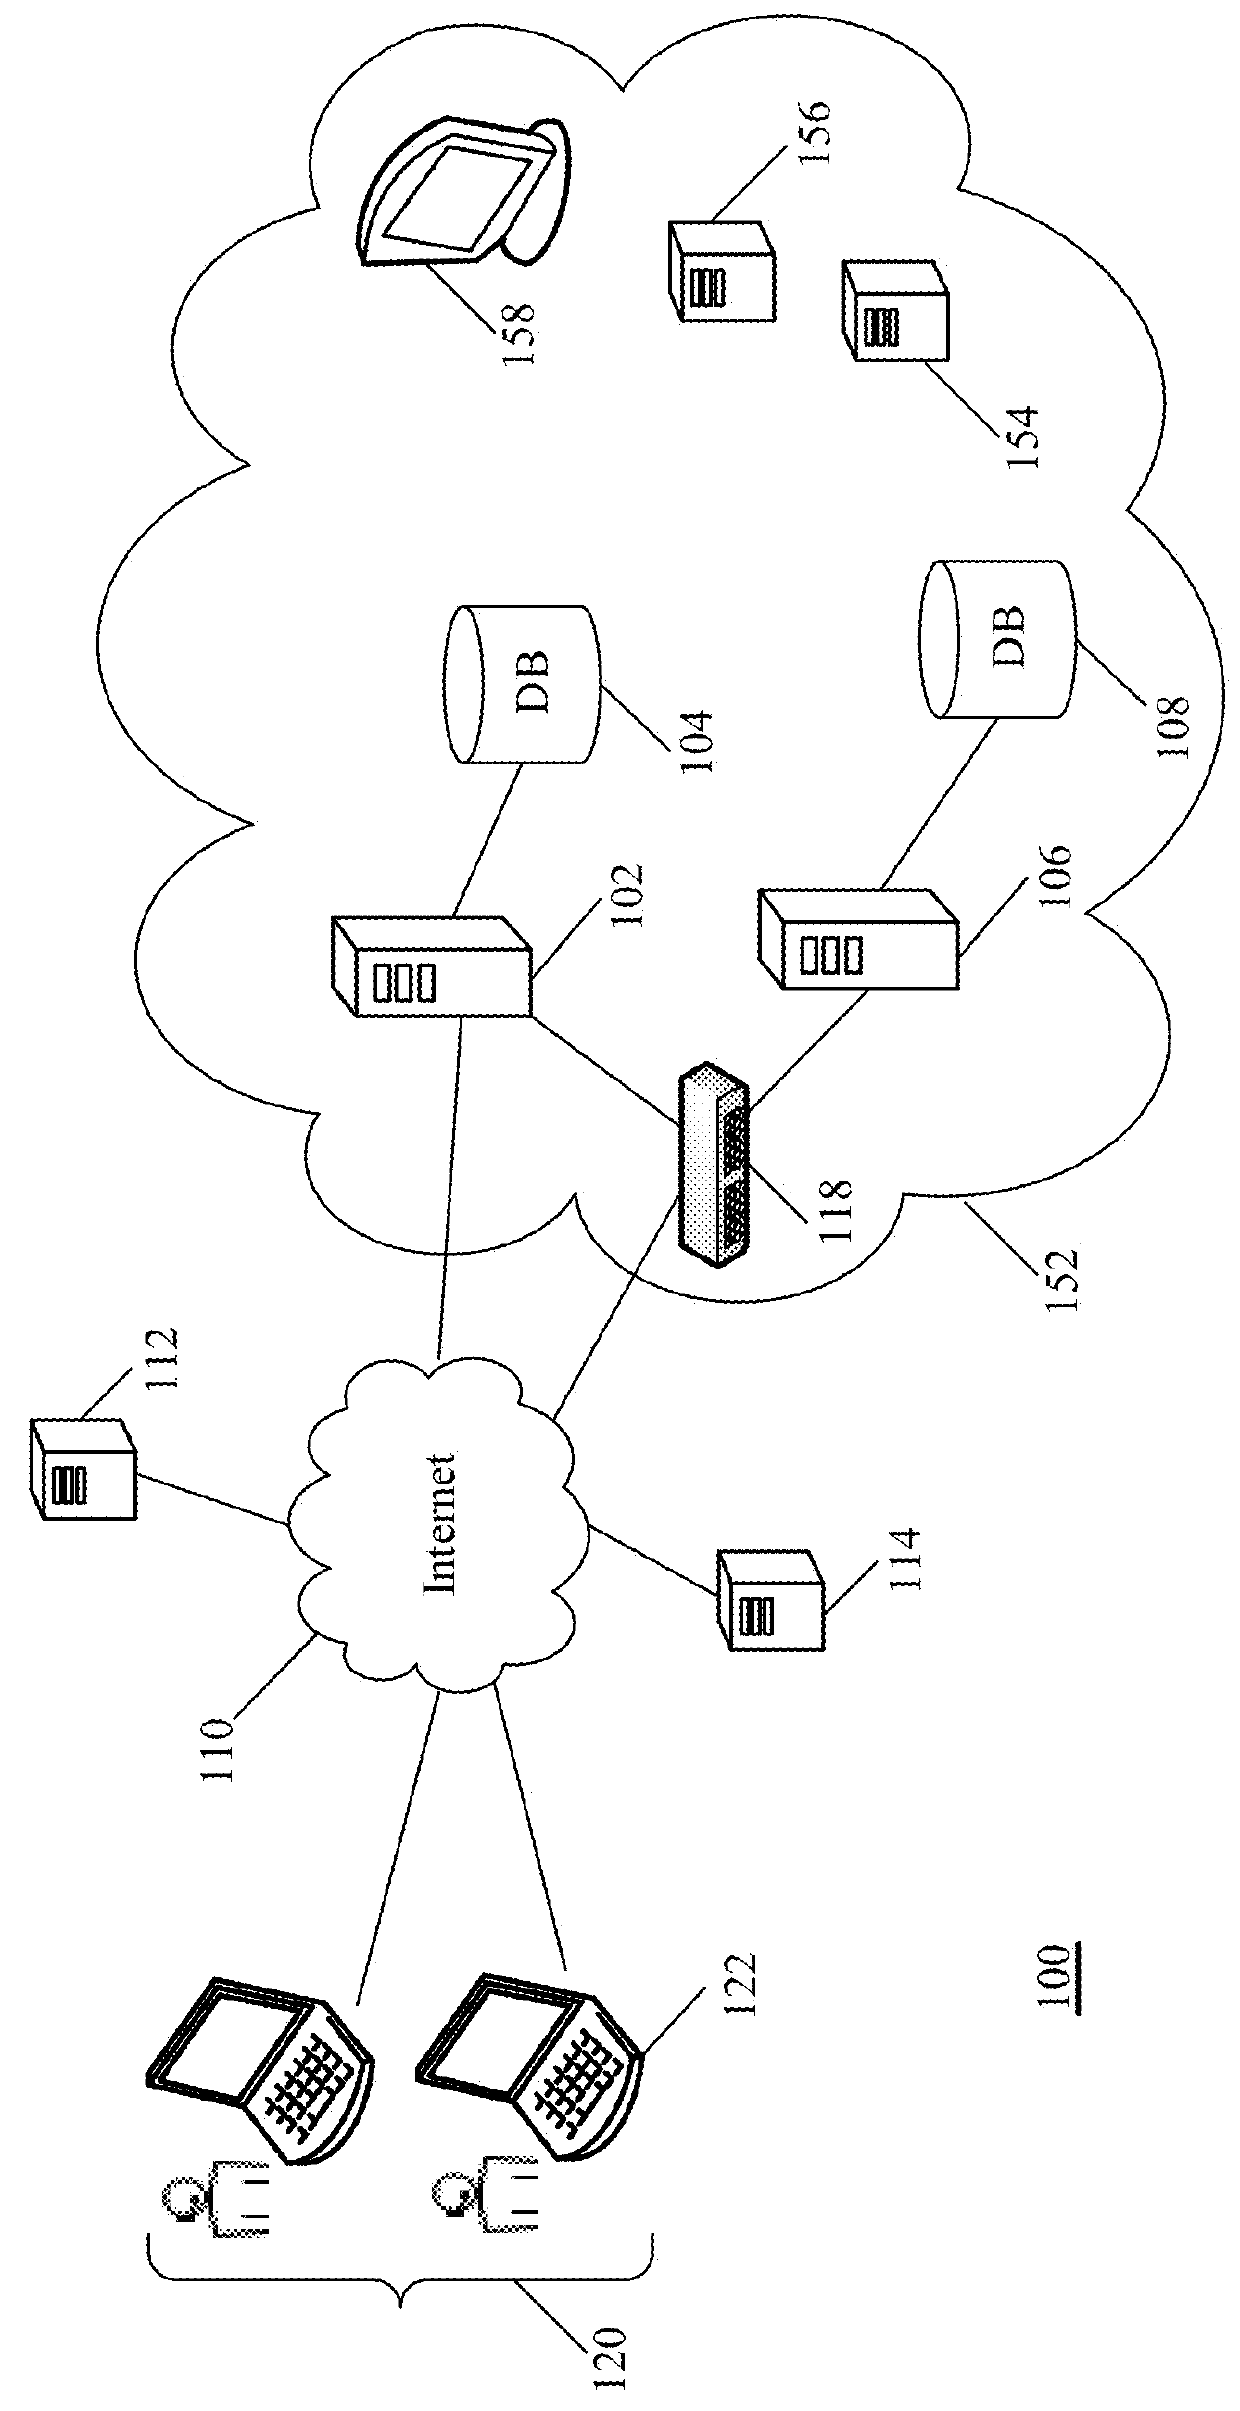 System, method and apparatus for organizing photographs stored on a mobile computing device